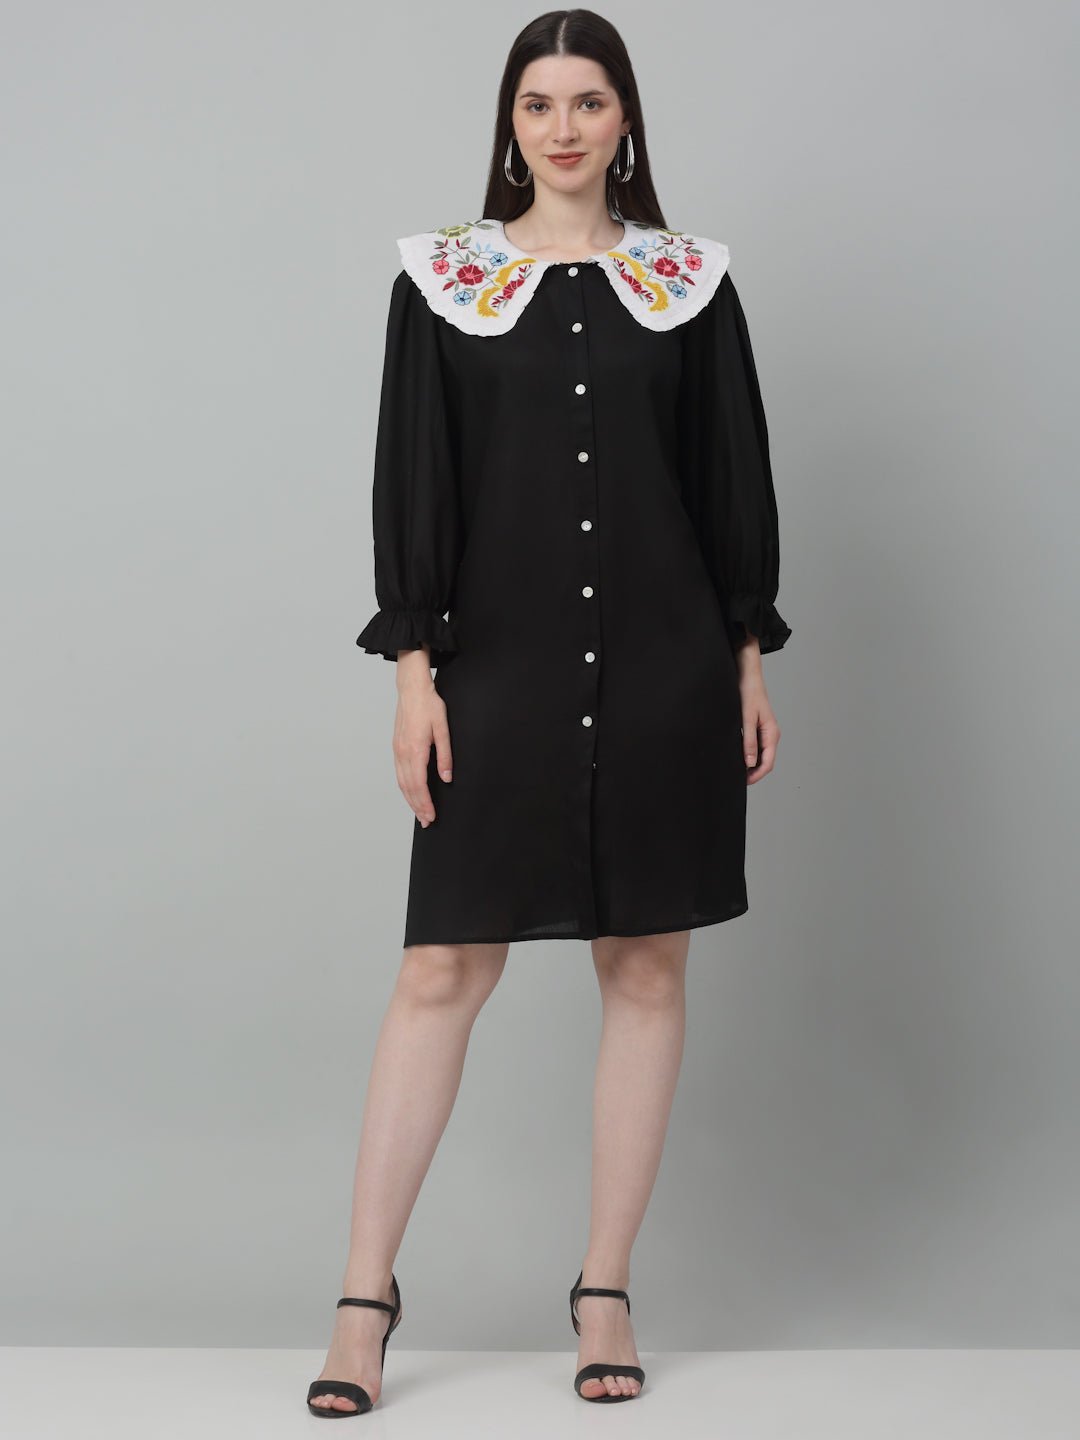 Women's Black Floral Embroidered A-line Dress